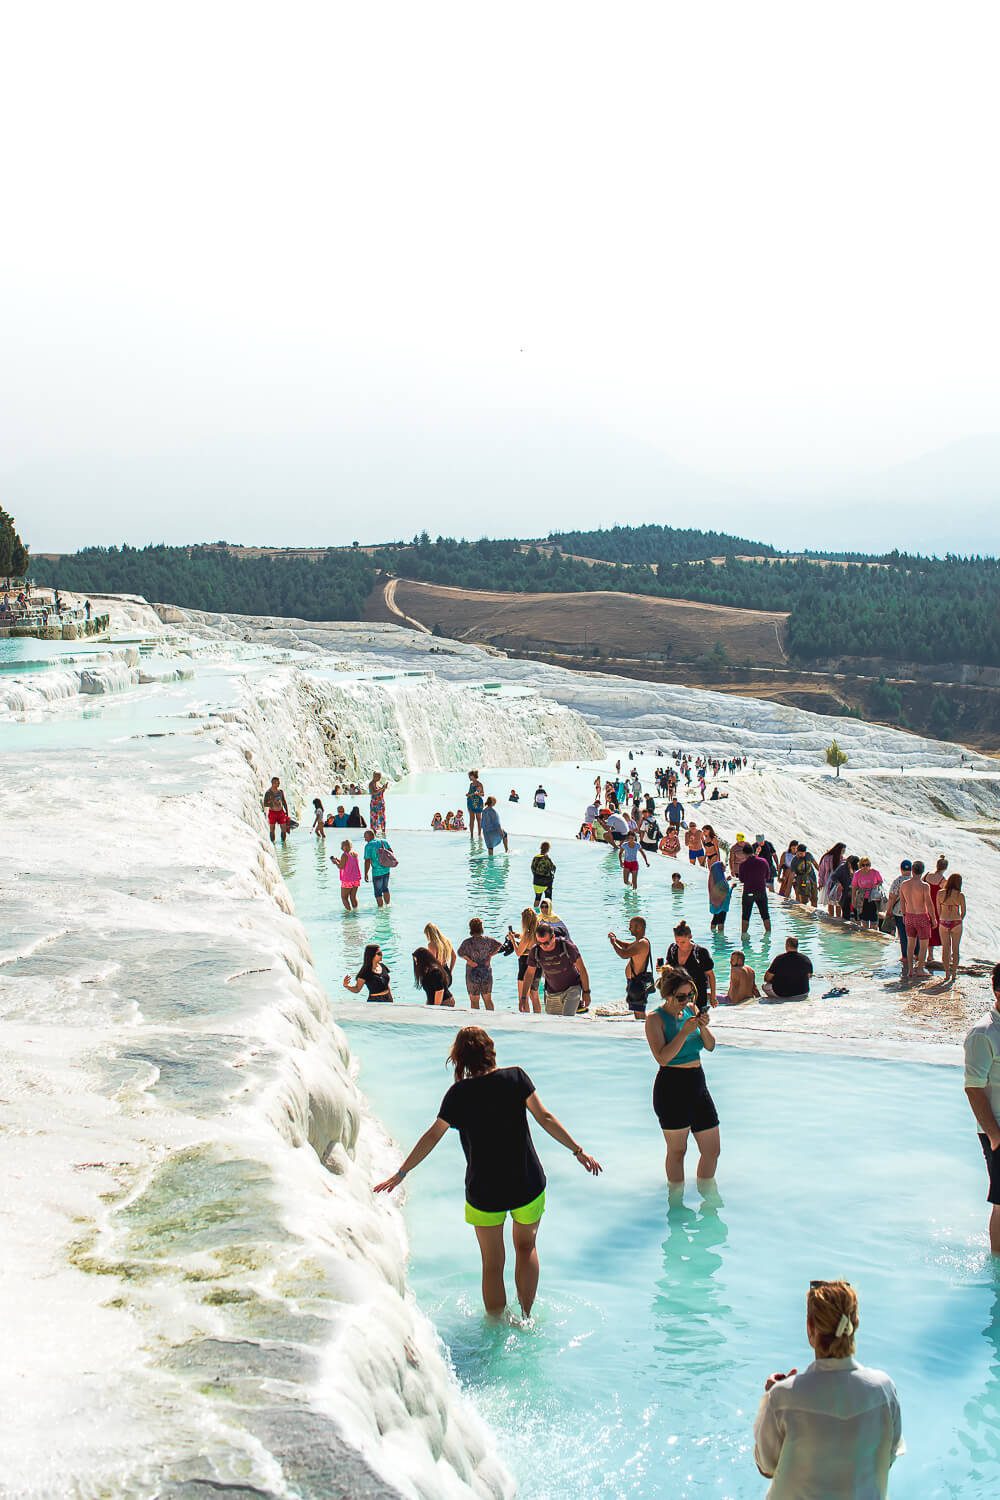 The travertine Pools in Pamukkale